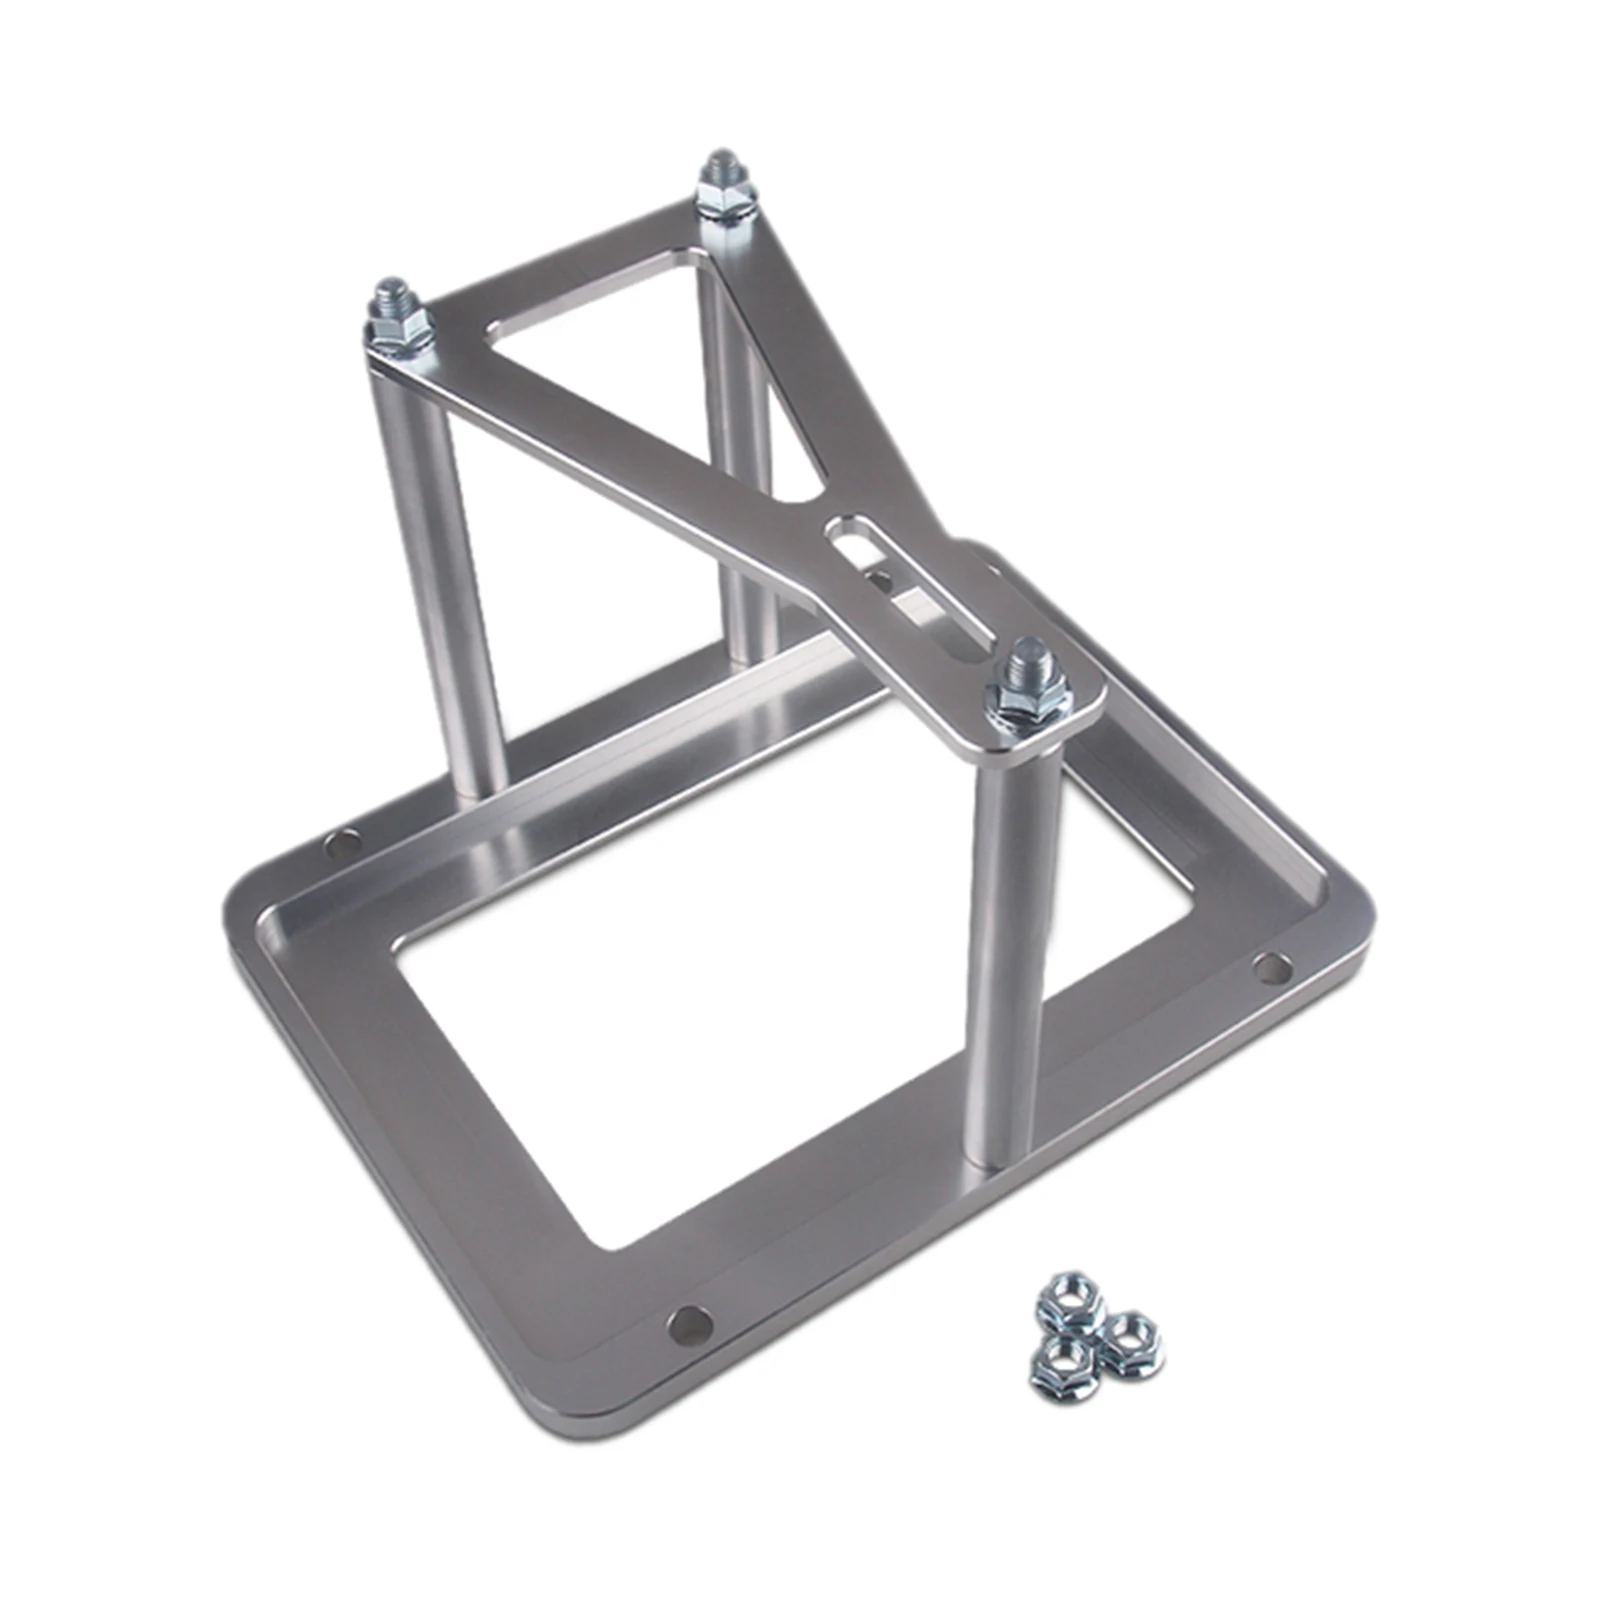 Billet Battery Tray Hold Down Relocation Box for Optima Race Racing Mount Universal Made from billet aluminum